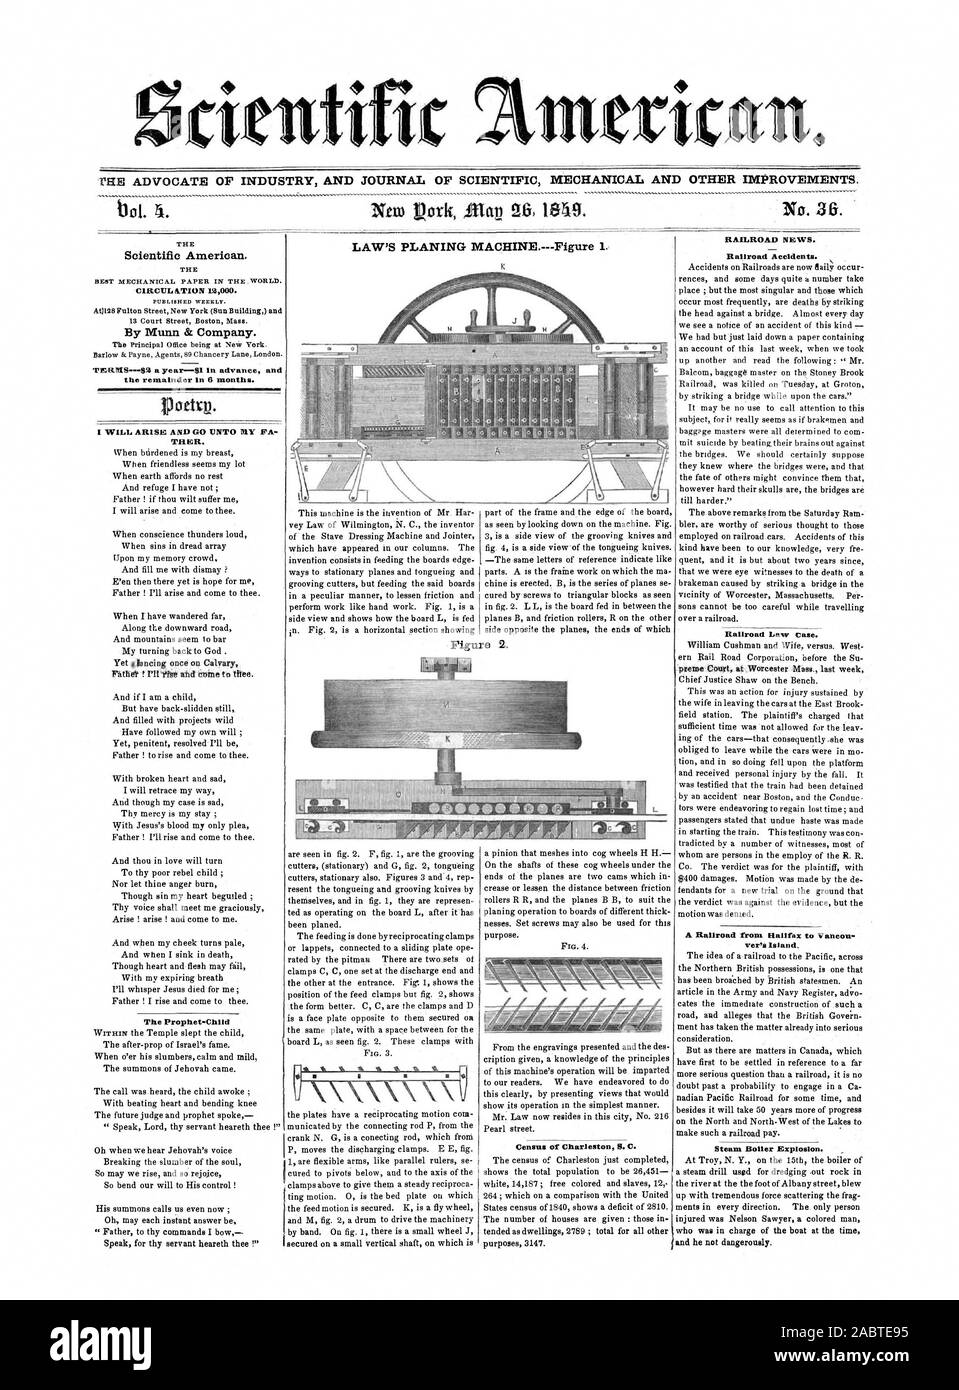 rientifit THE ADVOCATE OP INDUSTRY AND JOURNAL OF SCIENTIFIC MECHANICAL AND OTHER IMPROVEMENTS. Nero Perk Sky 26 1619. LAW'S PLANING MACHINE.--Figure 1. Figure 2. C1RCUL AT1ON 12000. By Munn & Company. TERAIS$6 a year51 in advance and the remainder in 6 months. THER. RAILROAD NEWS. Railroad Accidents. Railroad Law Case. A Railroad from Halifax to Vancou ver's Island. Steam Boiler Explosion. Scientific American., 1849-05-26 Stock Photo